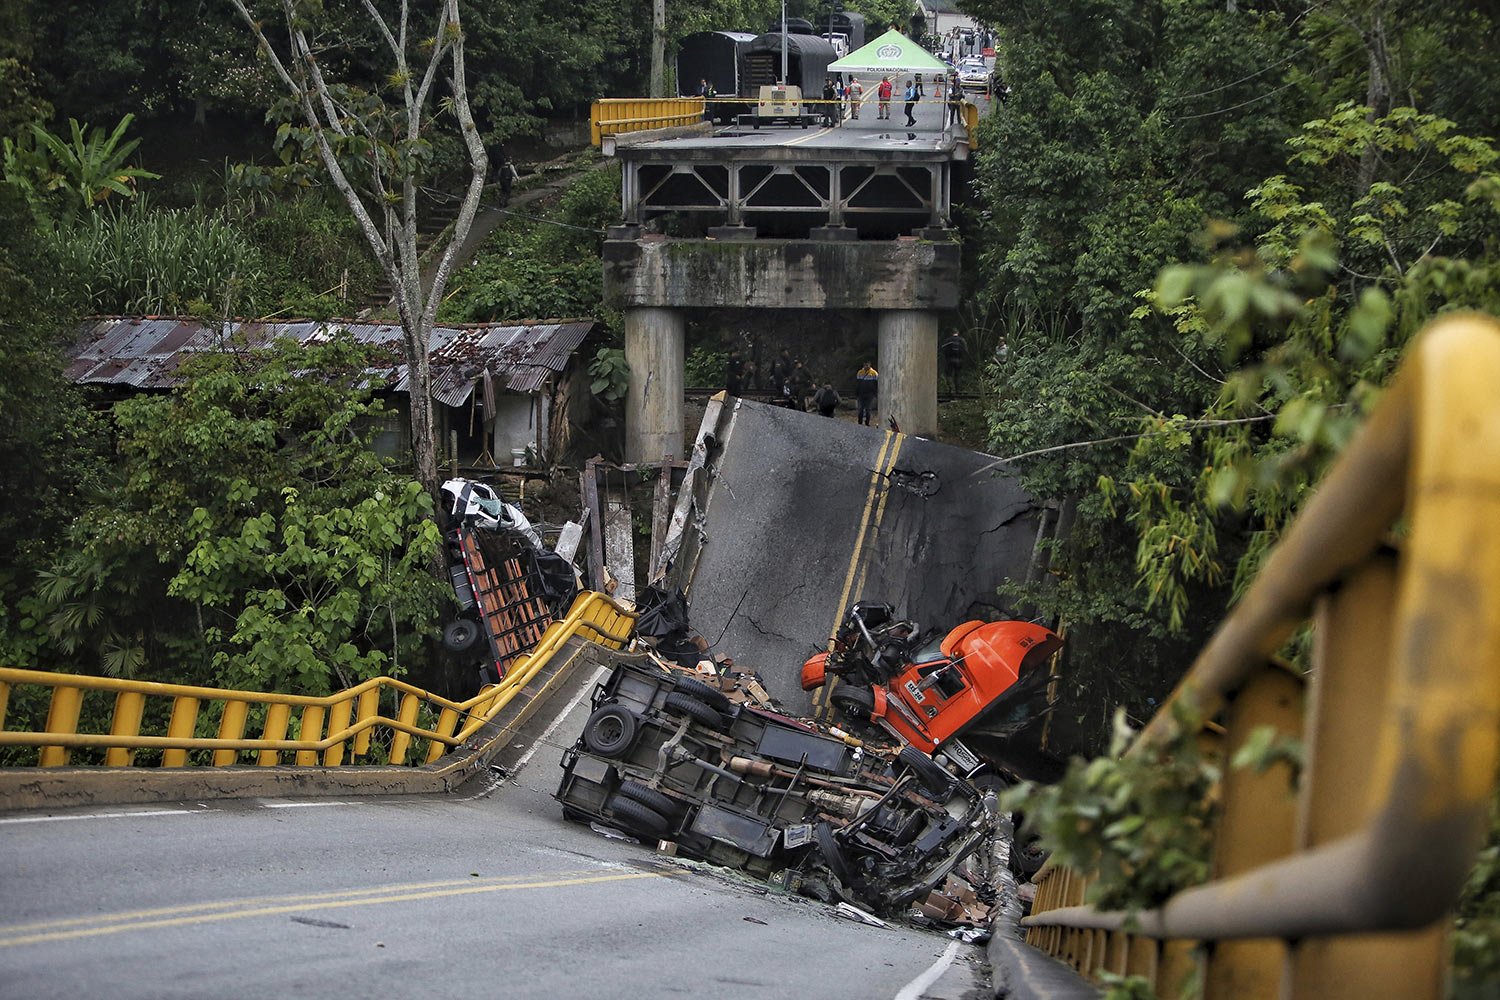  Crashed vehicles lay on and under the El Alambrado bridge after it collapsed the previous day in Caicedonia, Colombia, April 13, 2023. Two people died and over a dozen were injured, according to authorities. (AP Photo/Andres Quintero) 